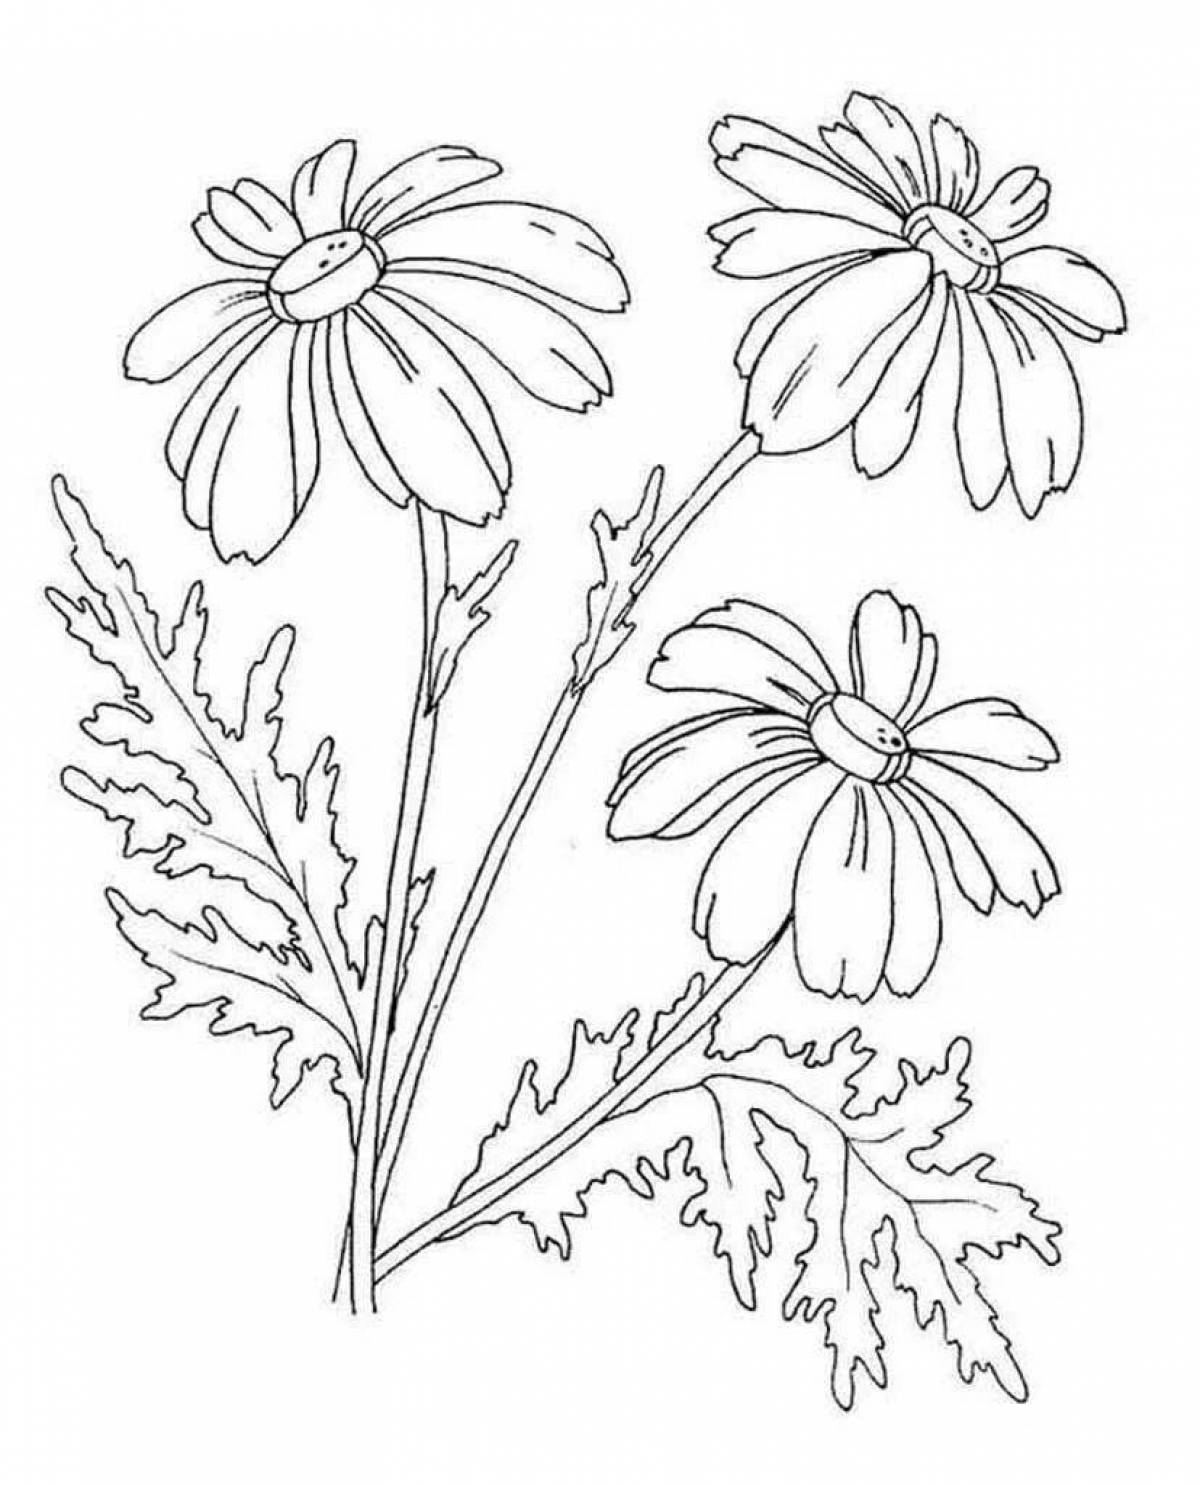 Adorable wild flowers coloring book for kids